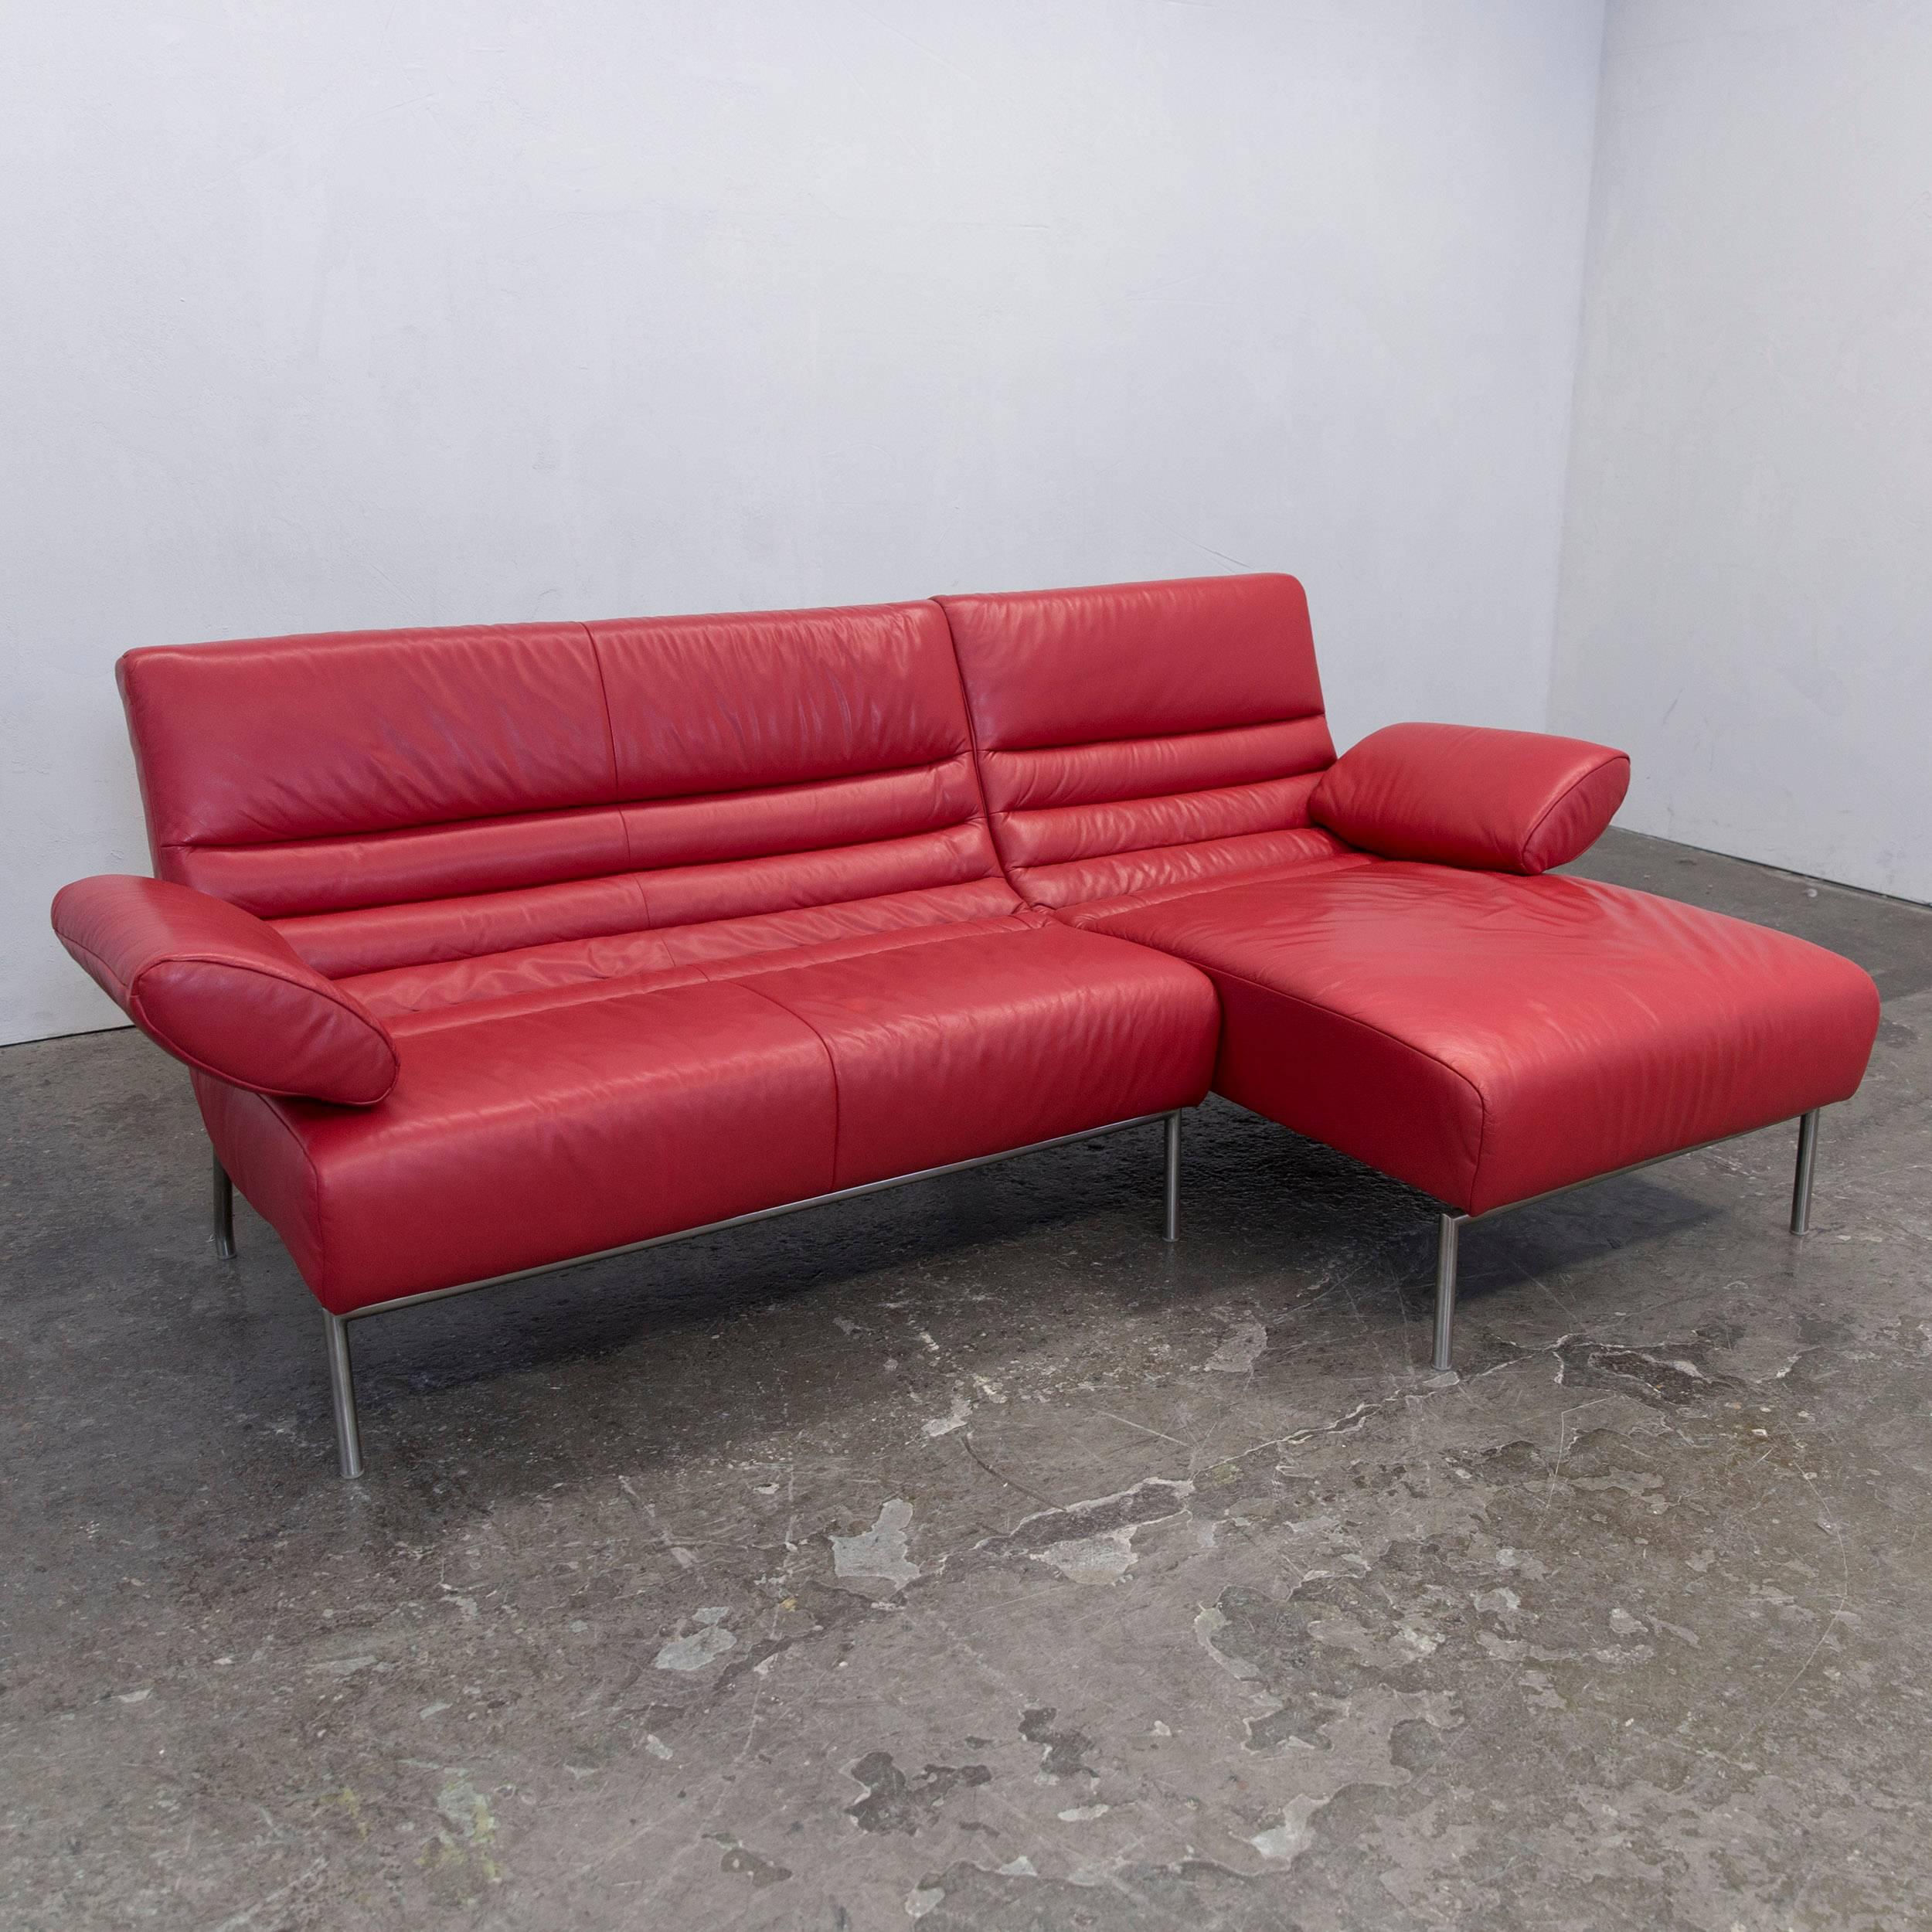 Contemporary Koinor Design Leather Corner Couch Red Function Modern